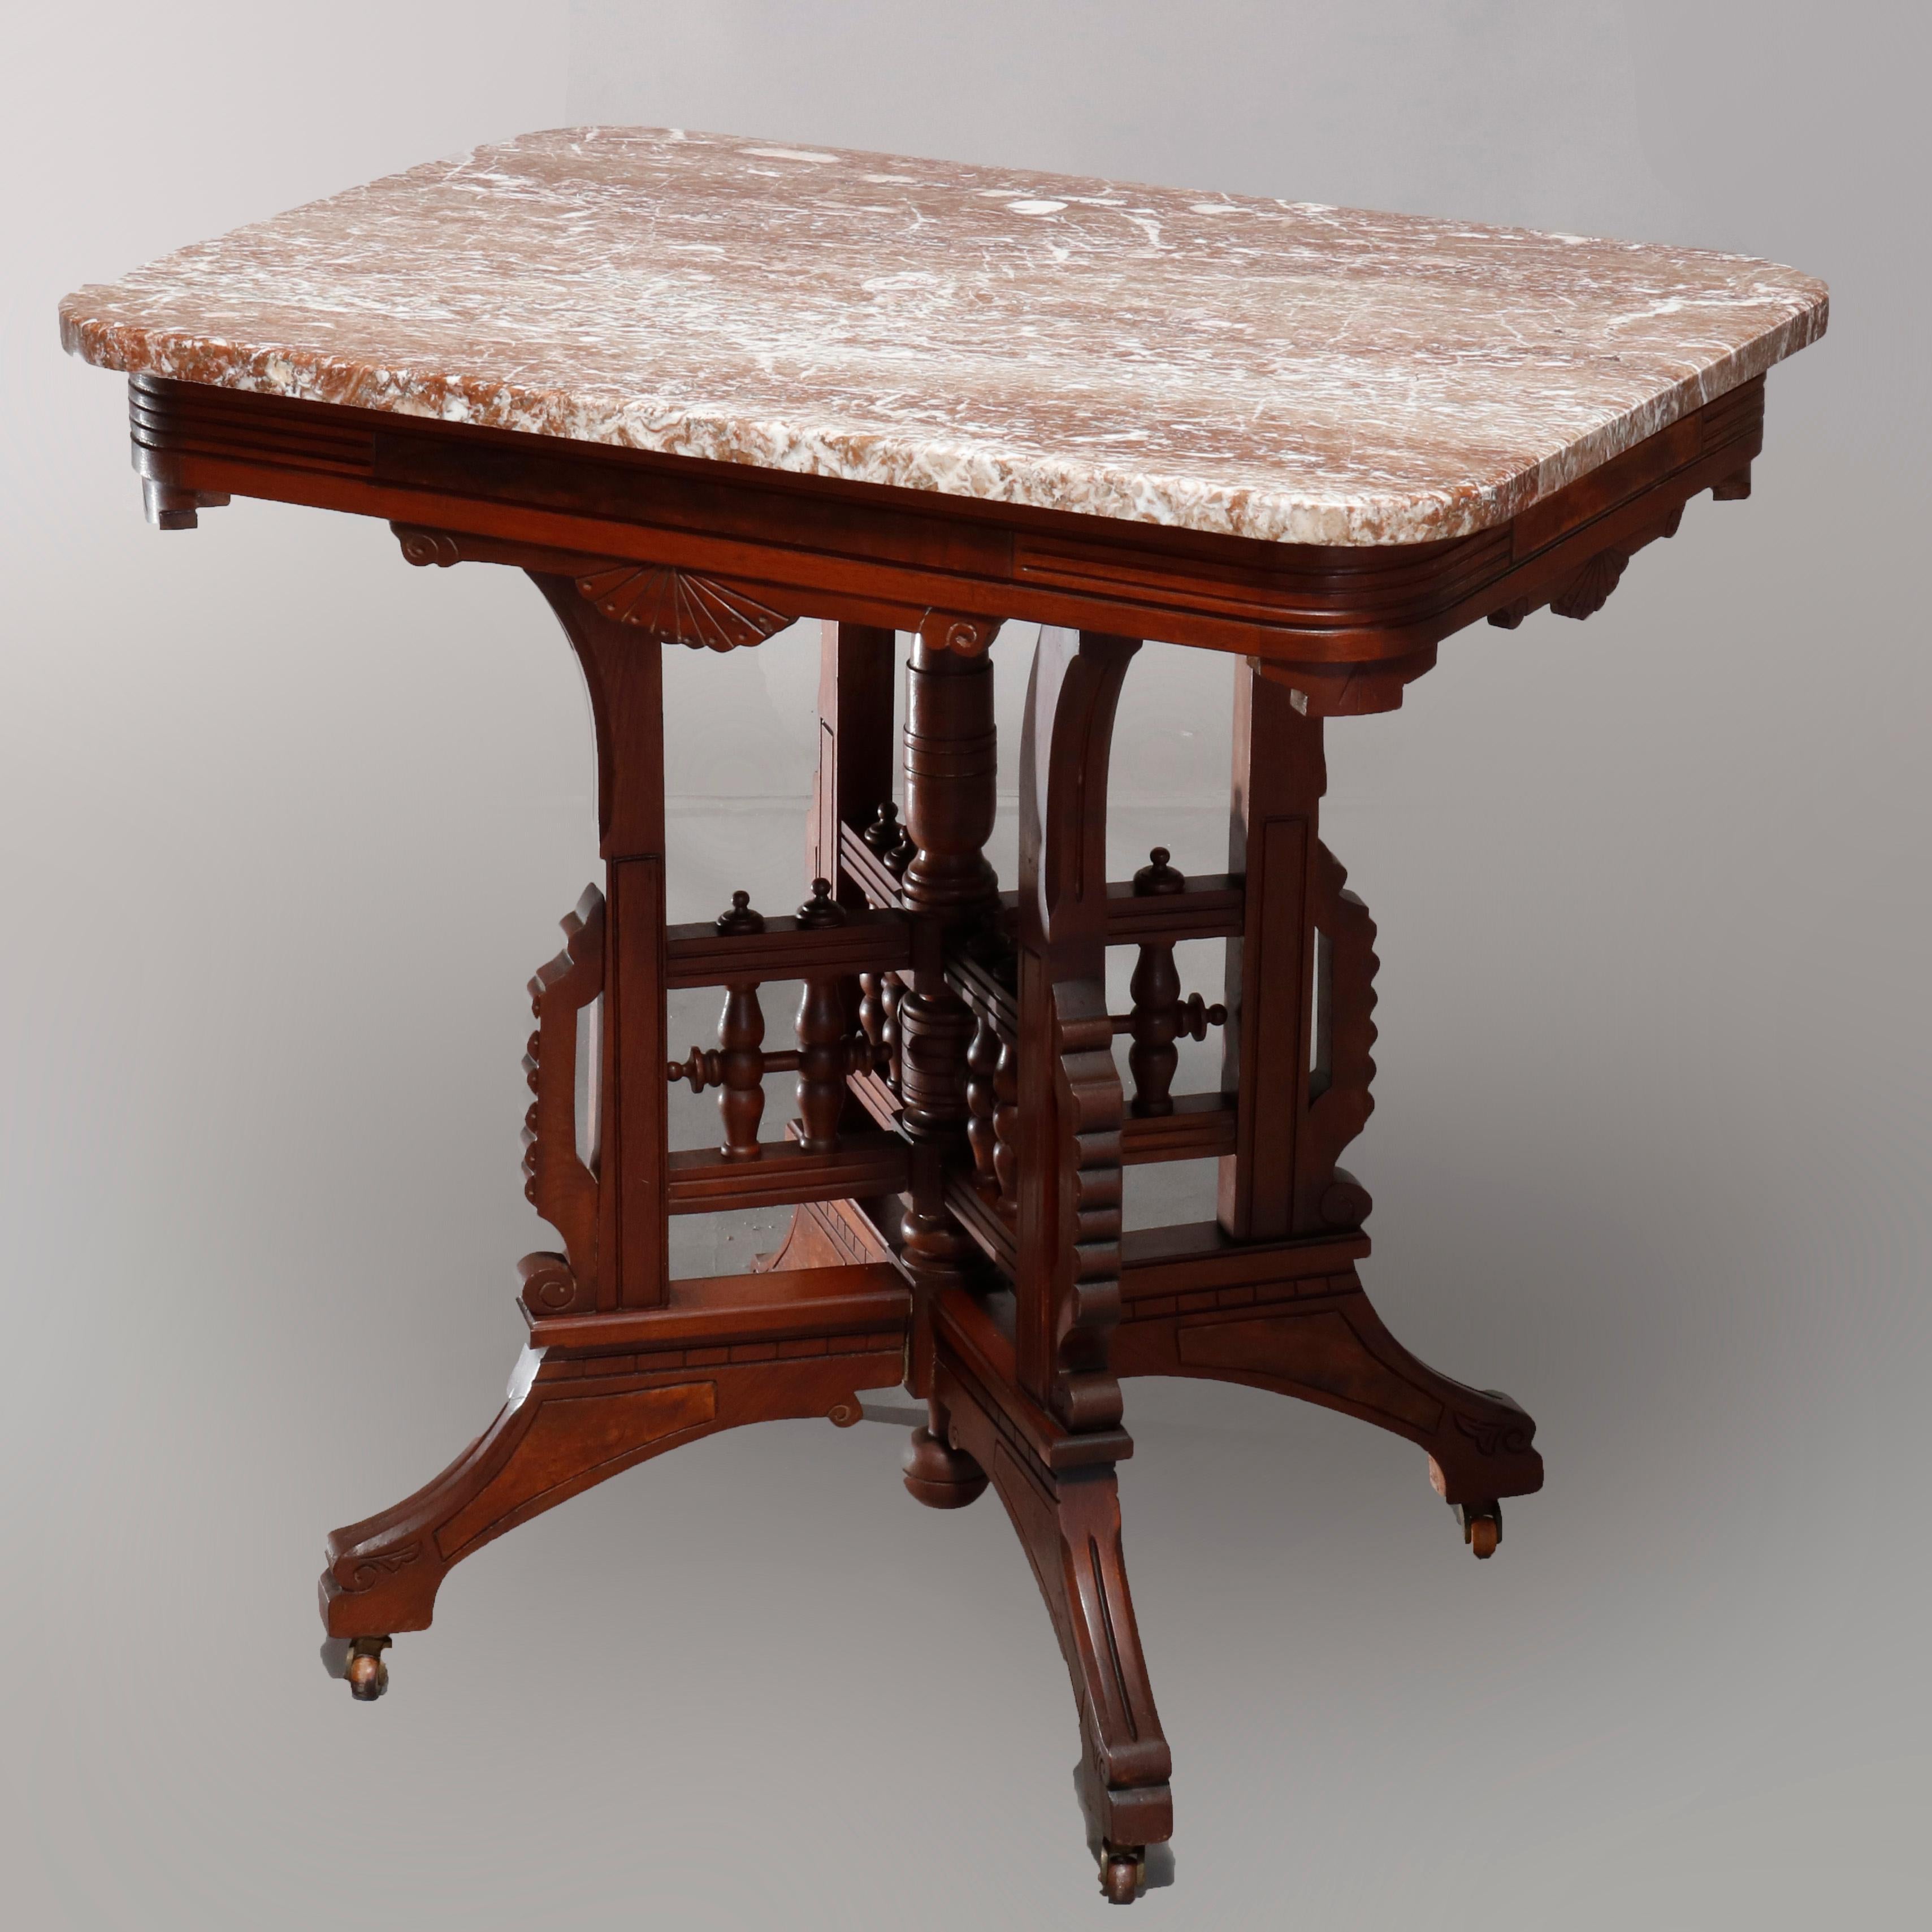 An antique Eastlake parlor table offers rectangular form with rouge marble top surmounting carved walnut base having skirt with shell and foliate elements over quadruped stylized stick and ball base, burl insets throughout, circa 1890

Measures: